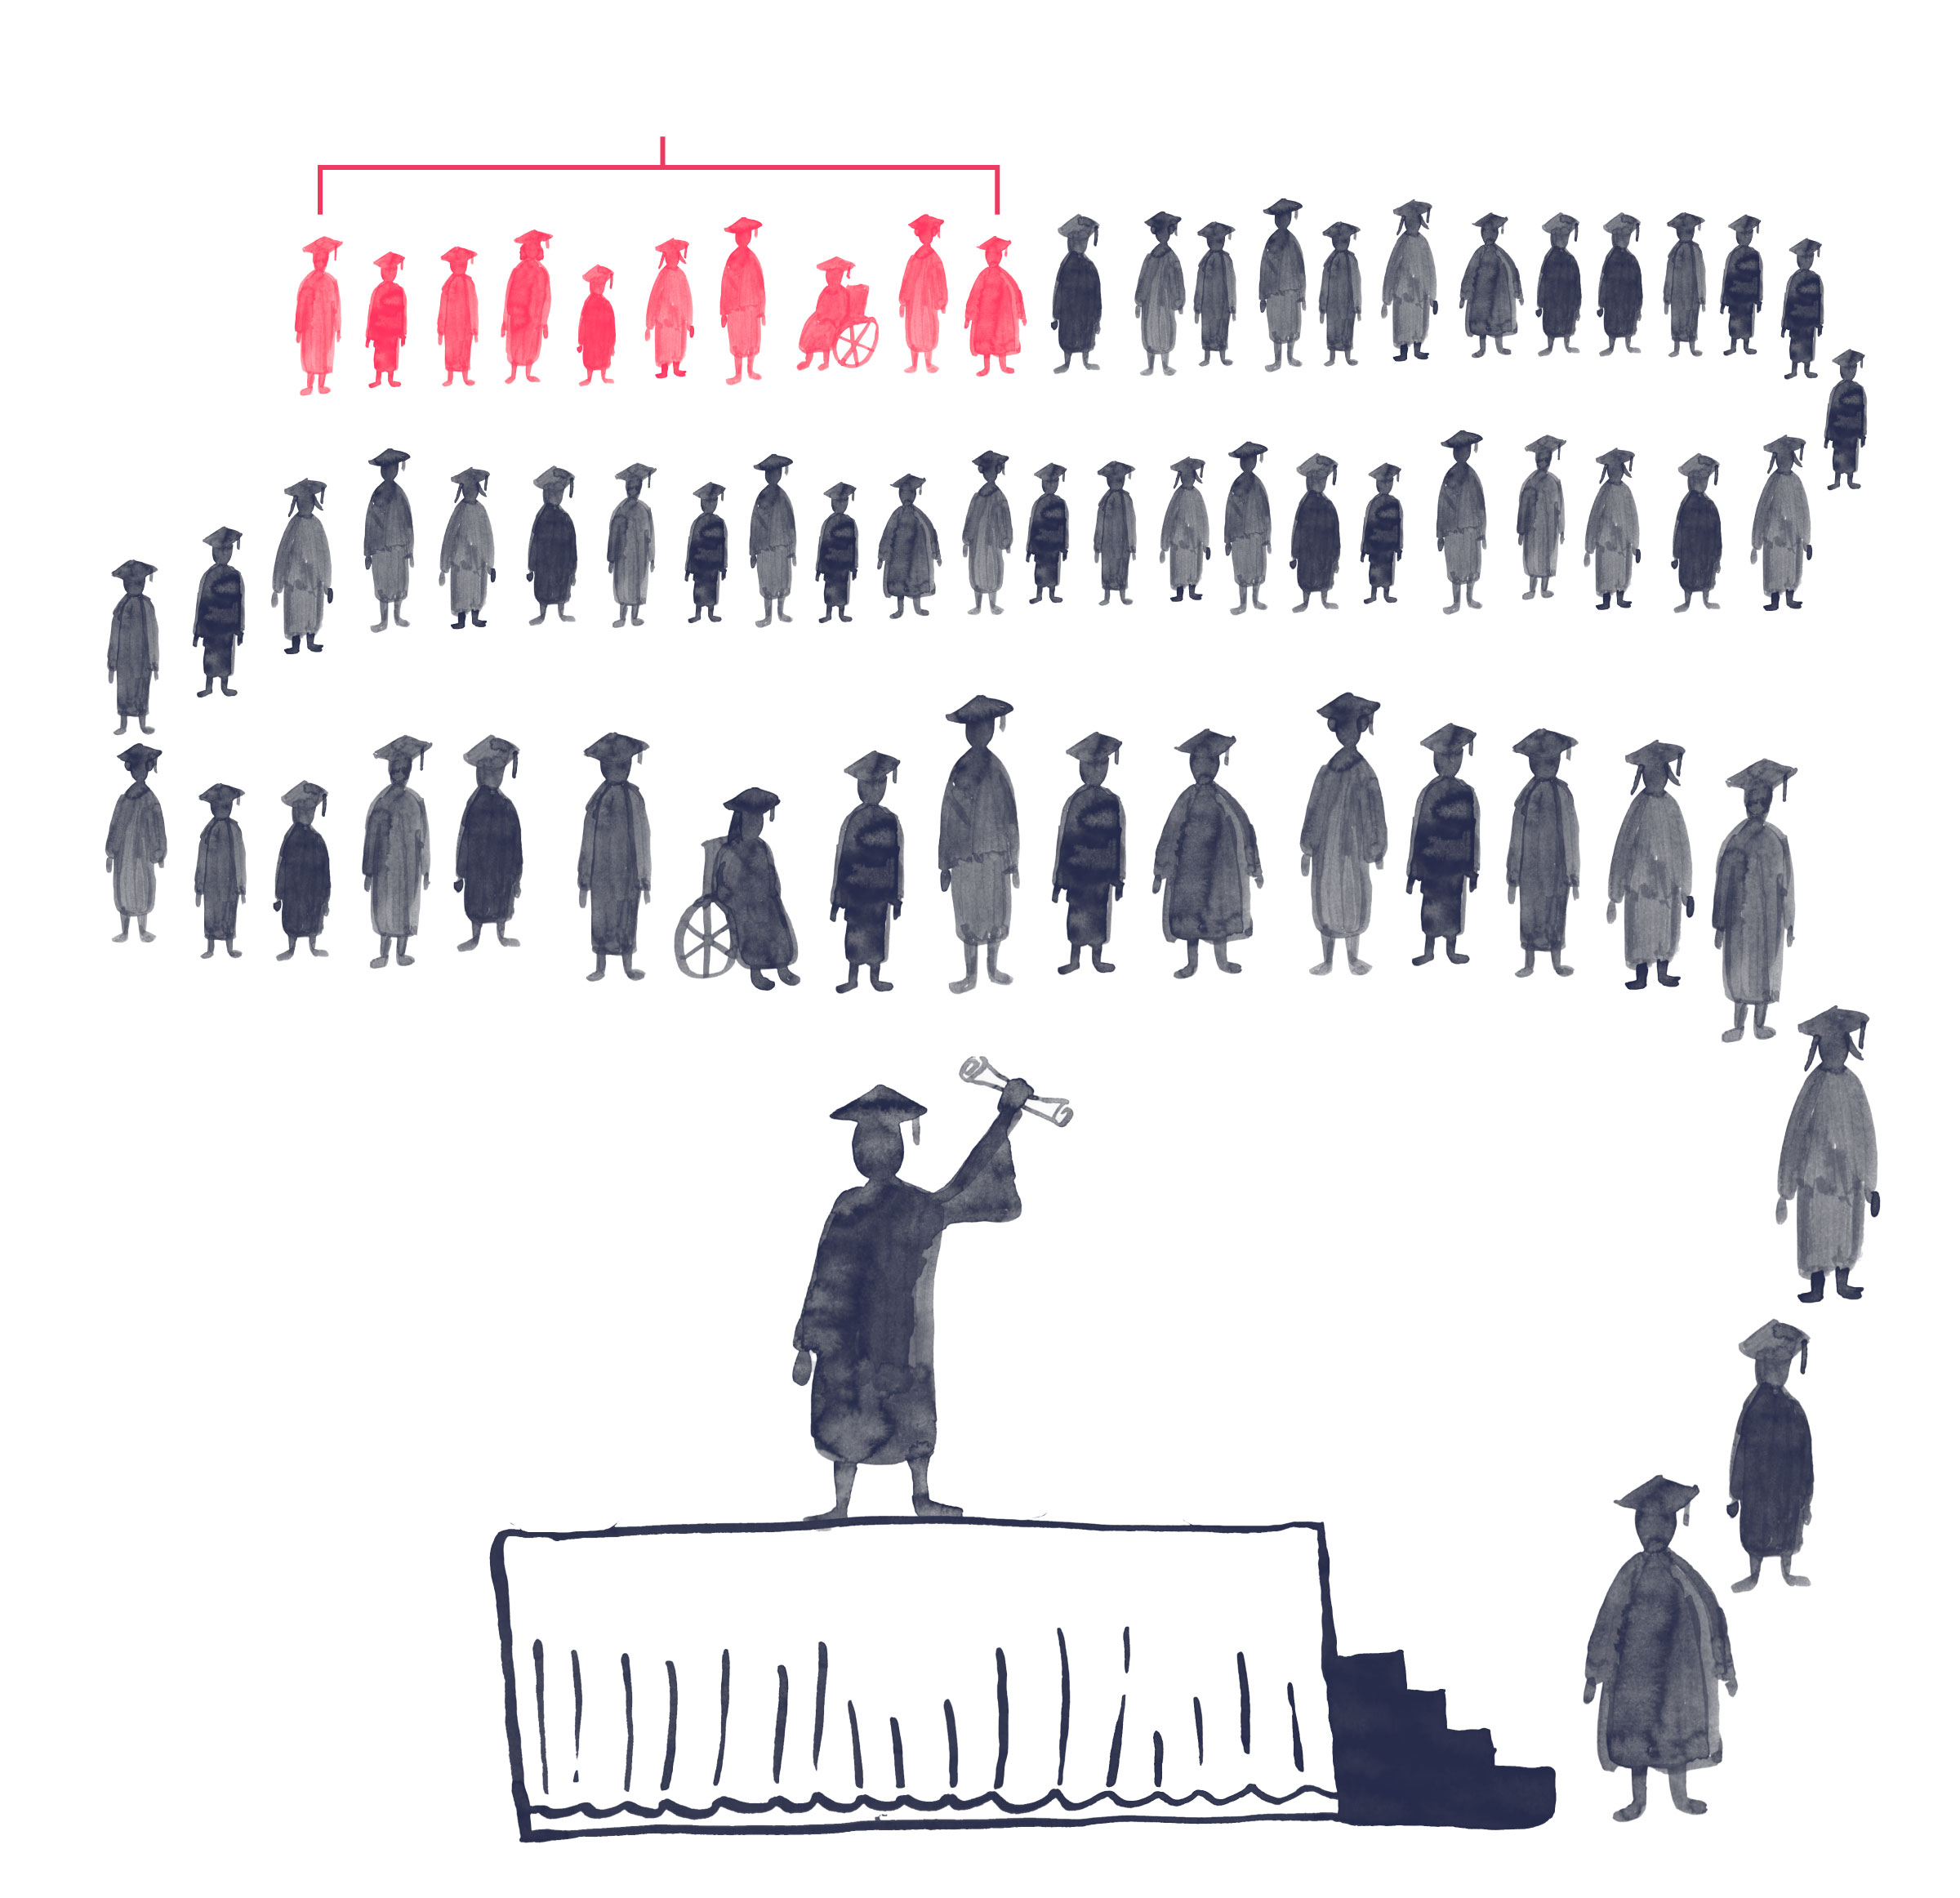 Illustration of a line of students snaking, with one student holding a diploma at the end